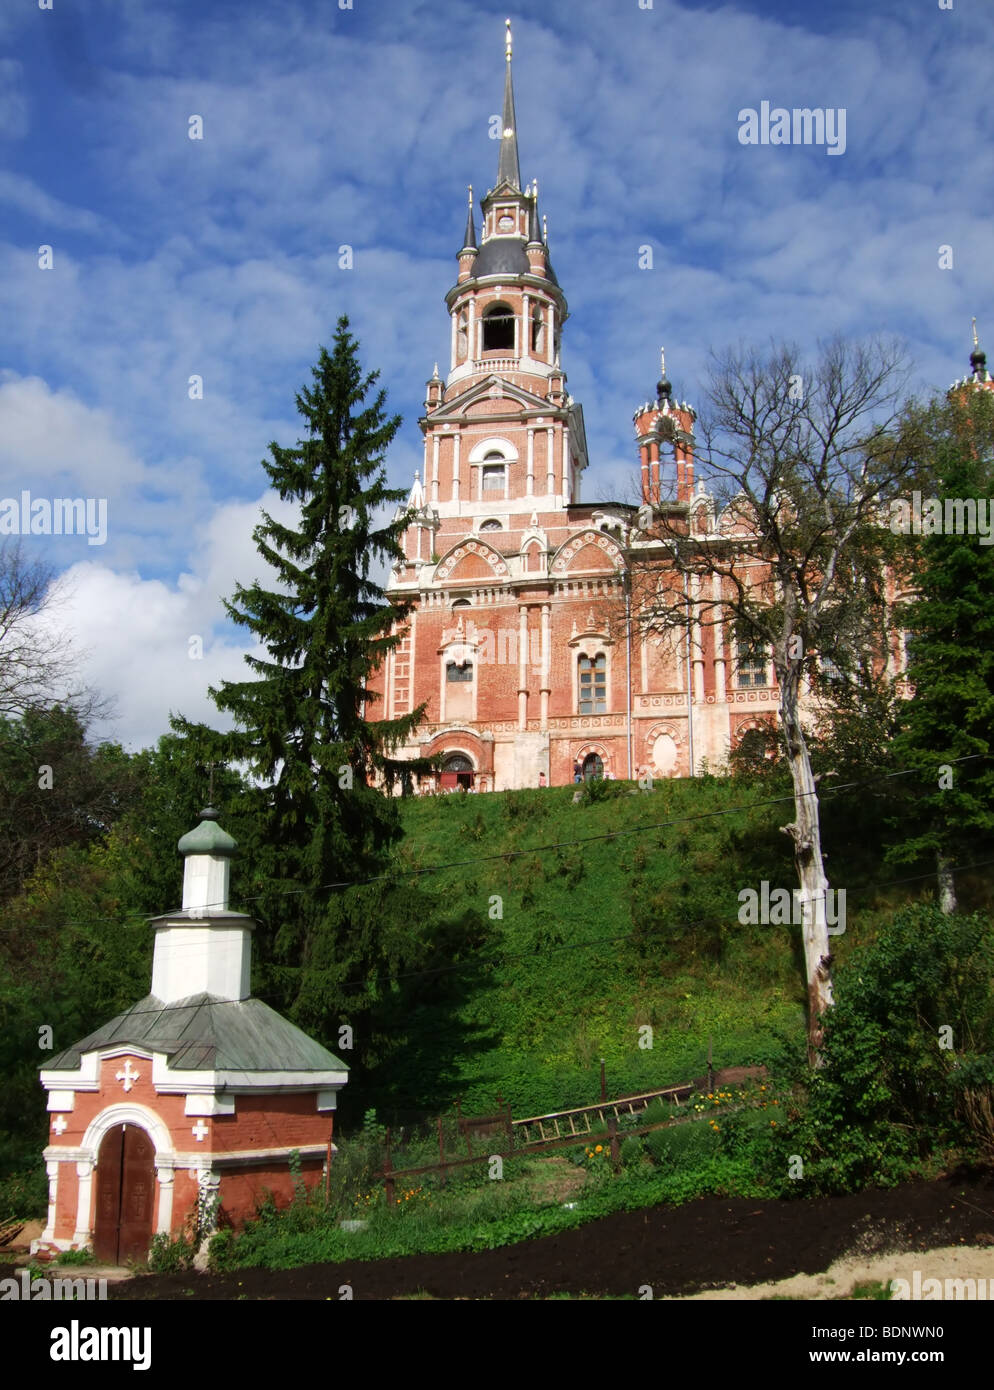 The Novo-Nikolsky cathedral at Mozhaysk. Mozhaysk is a small town in Moscow region of Russia Stock Photo